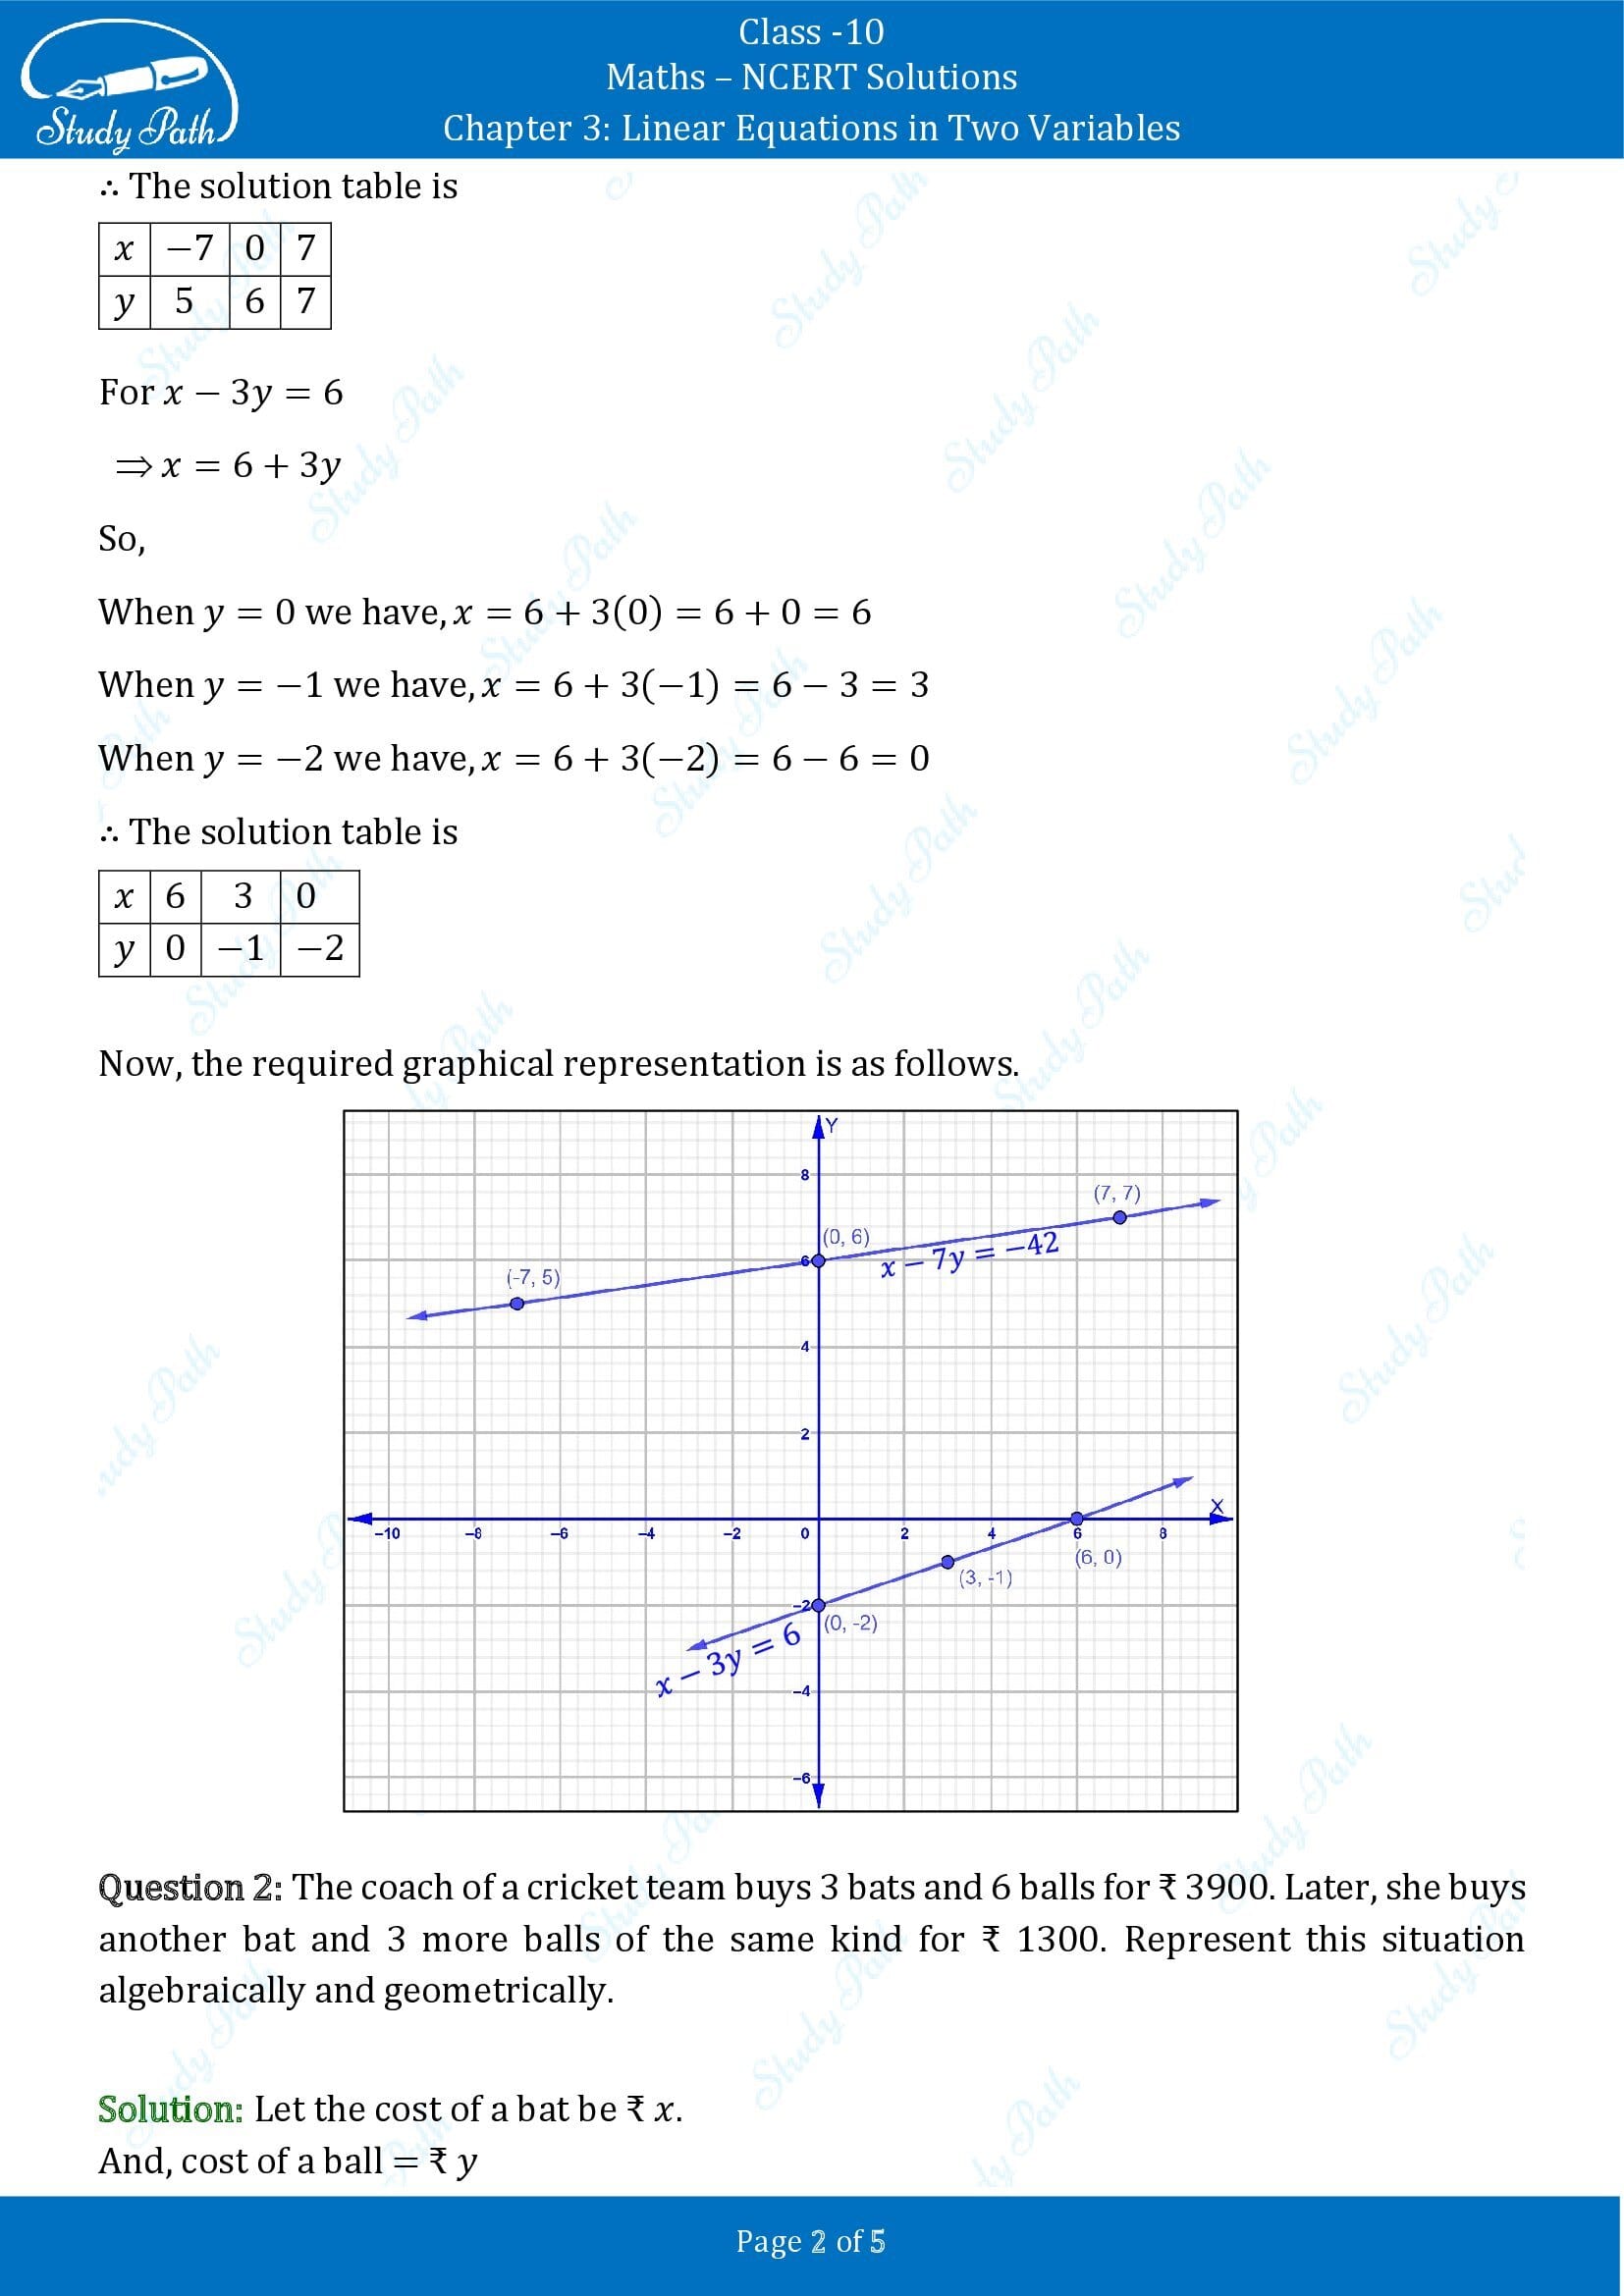 NCERT Solutions for Class 10 Maths Chapter 3 Linear Equations in Two Variables Exercise 3.1 00002